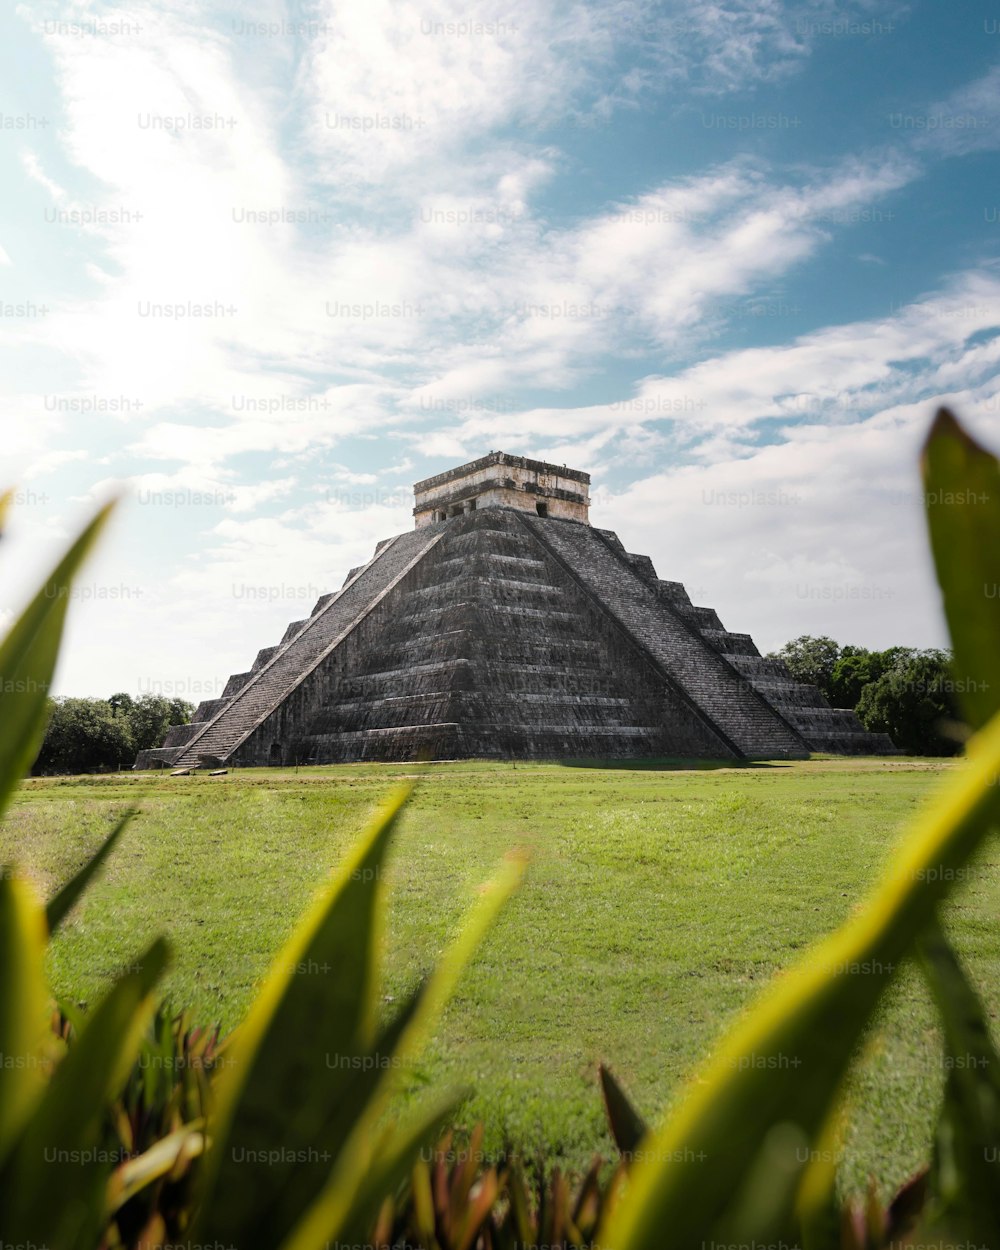 A vertical shot of Pyramid of Kukulkan, a temple on the ruins of the ancient Mayan city of Chichen Itza on the Yucatan Peninsula in Mexico